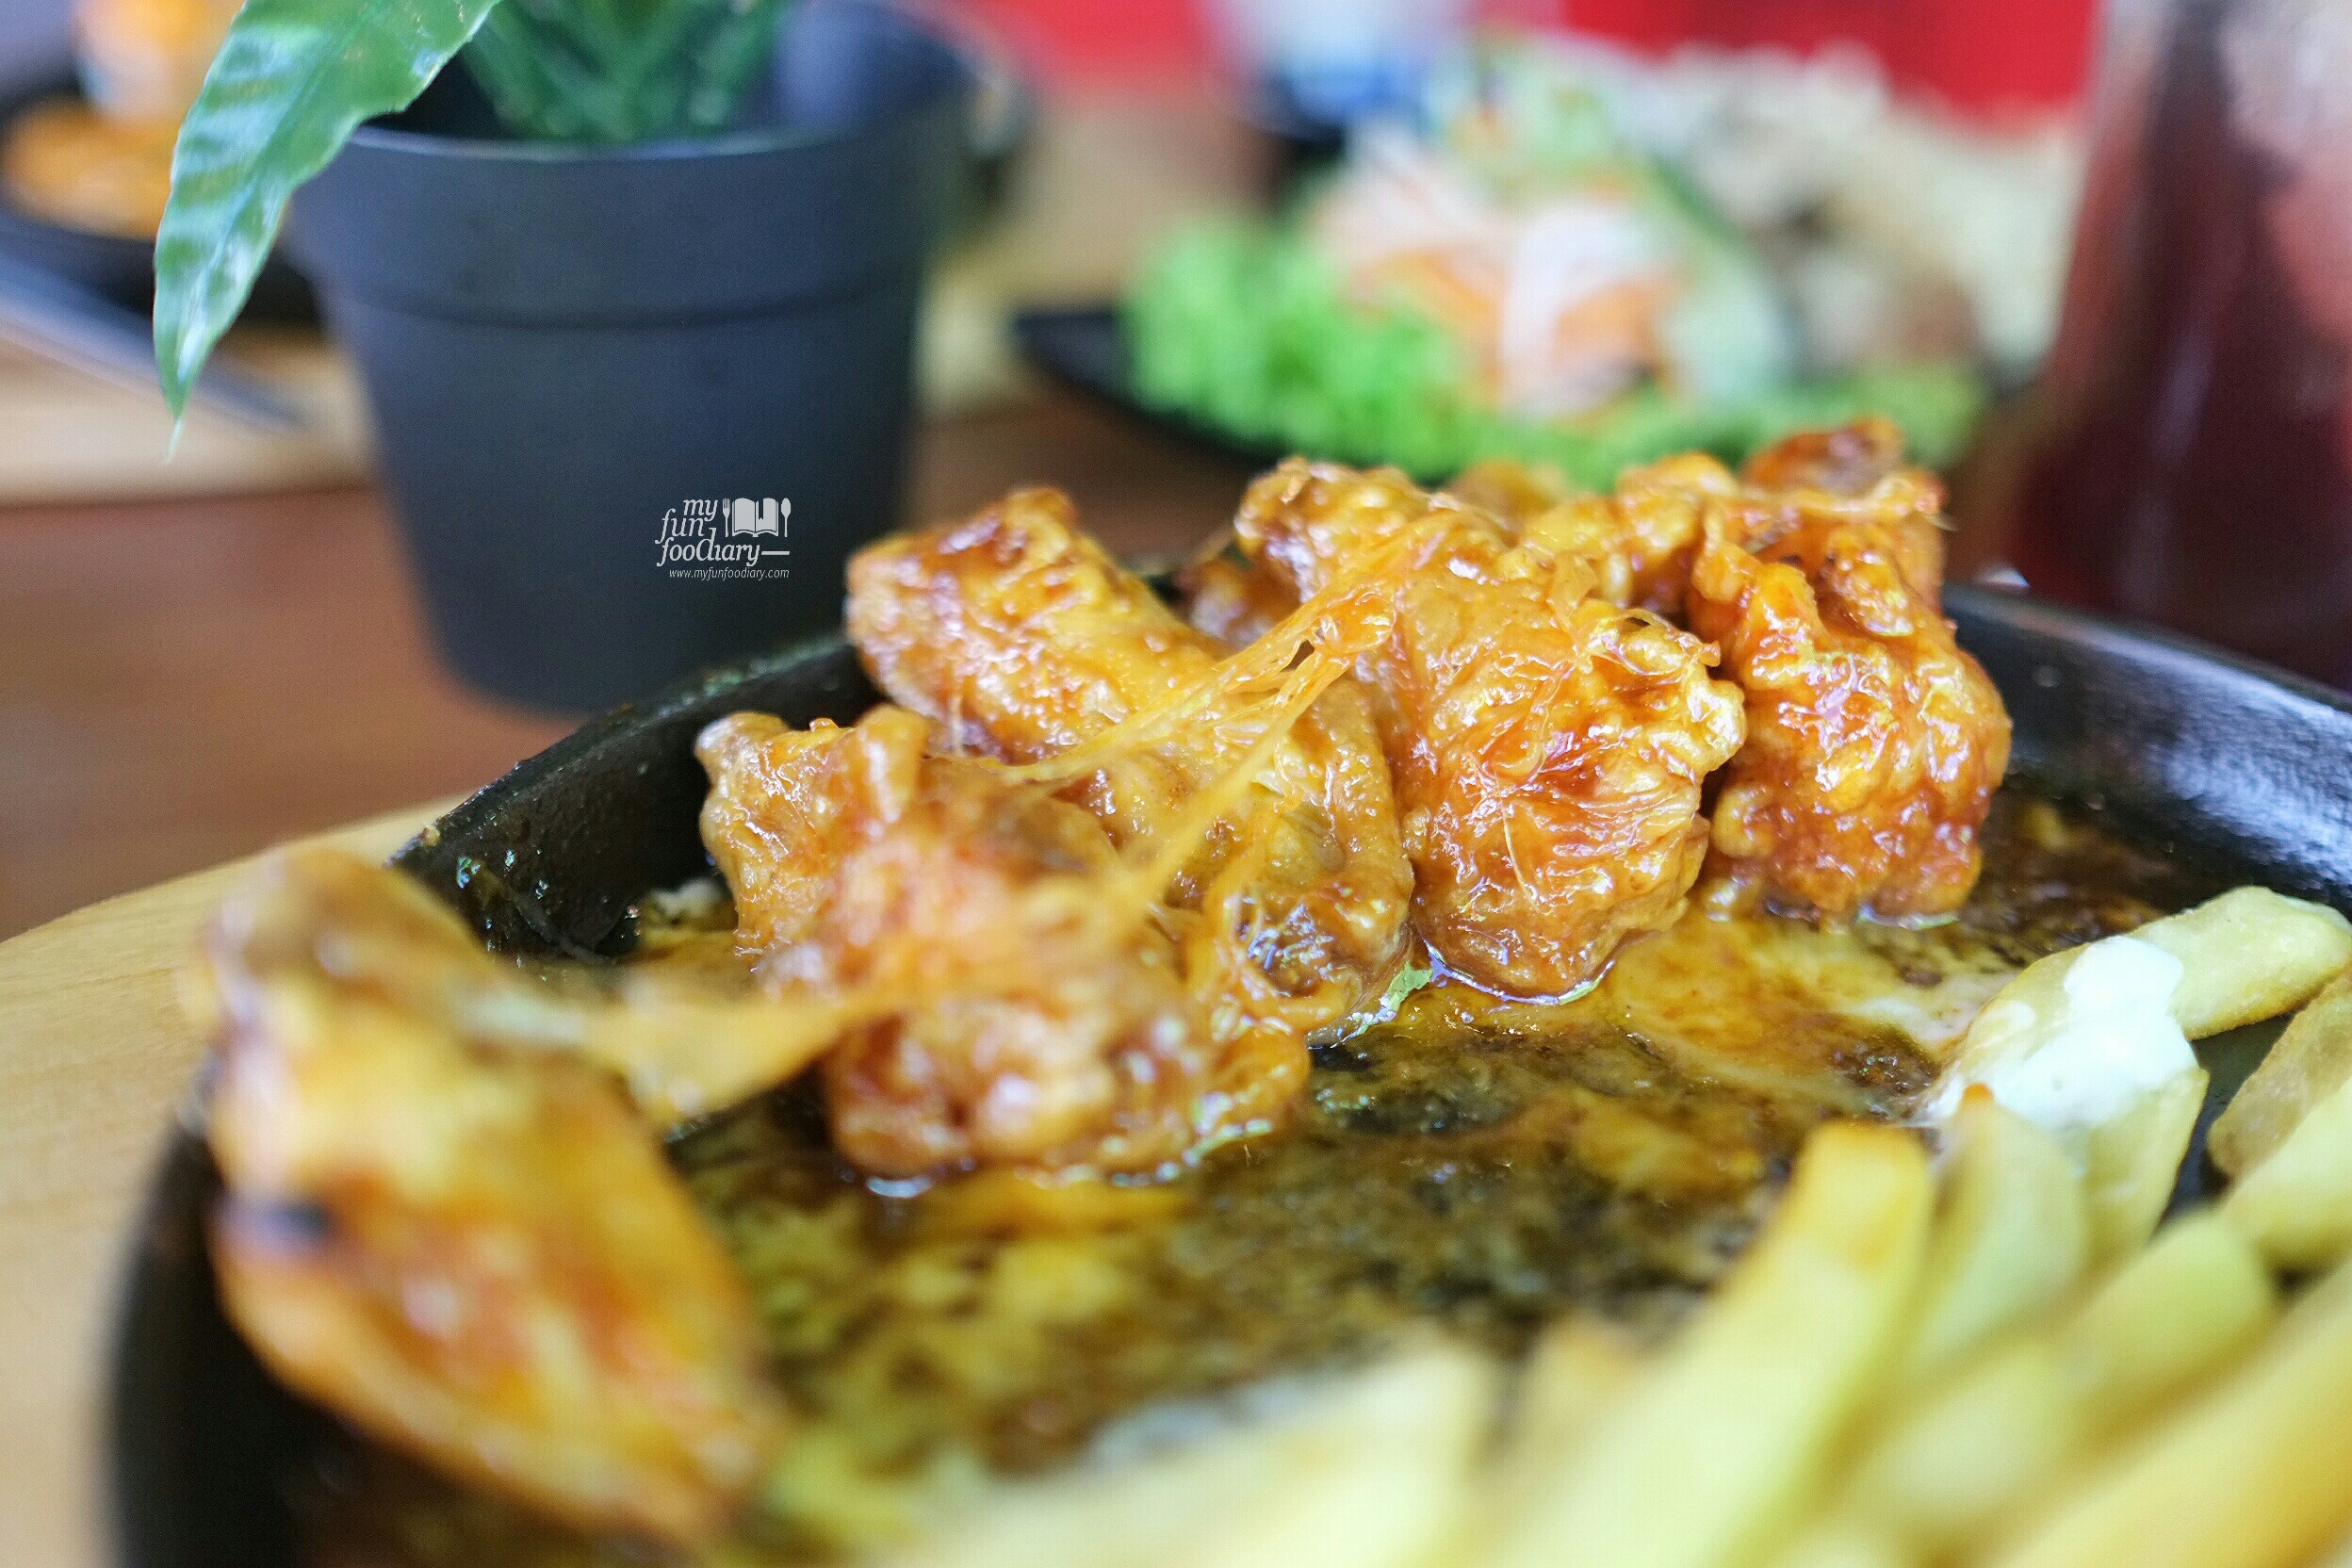 Spicy Chicken Wings with Cheese at Pat Bing Soo Korean Dessert by Myfunfoodiary 02